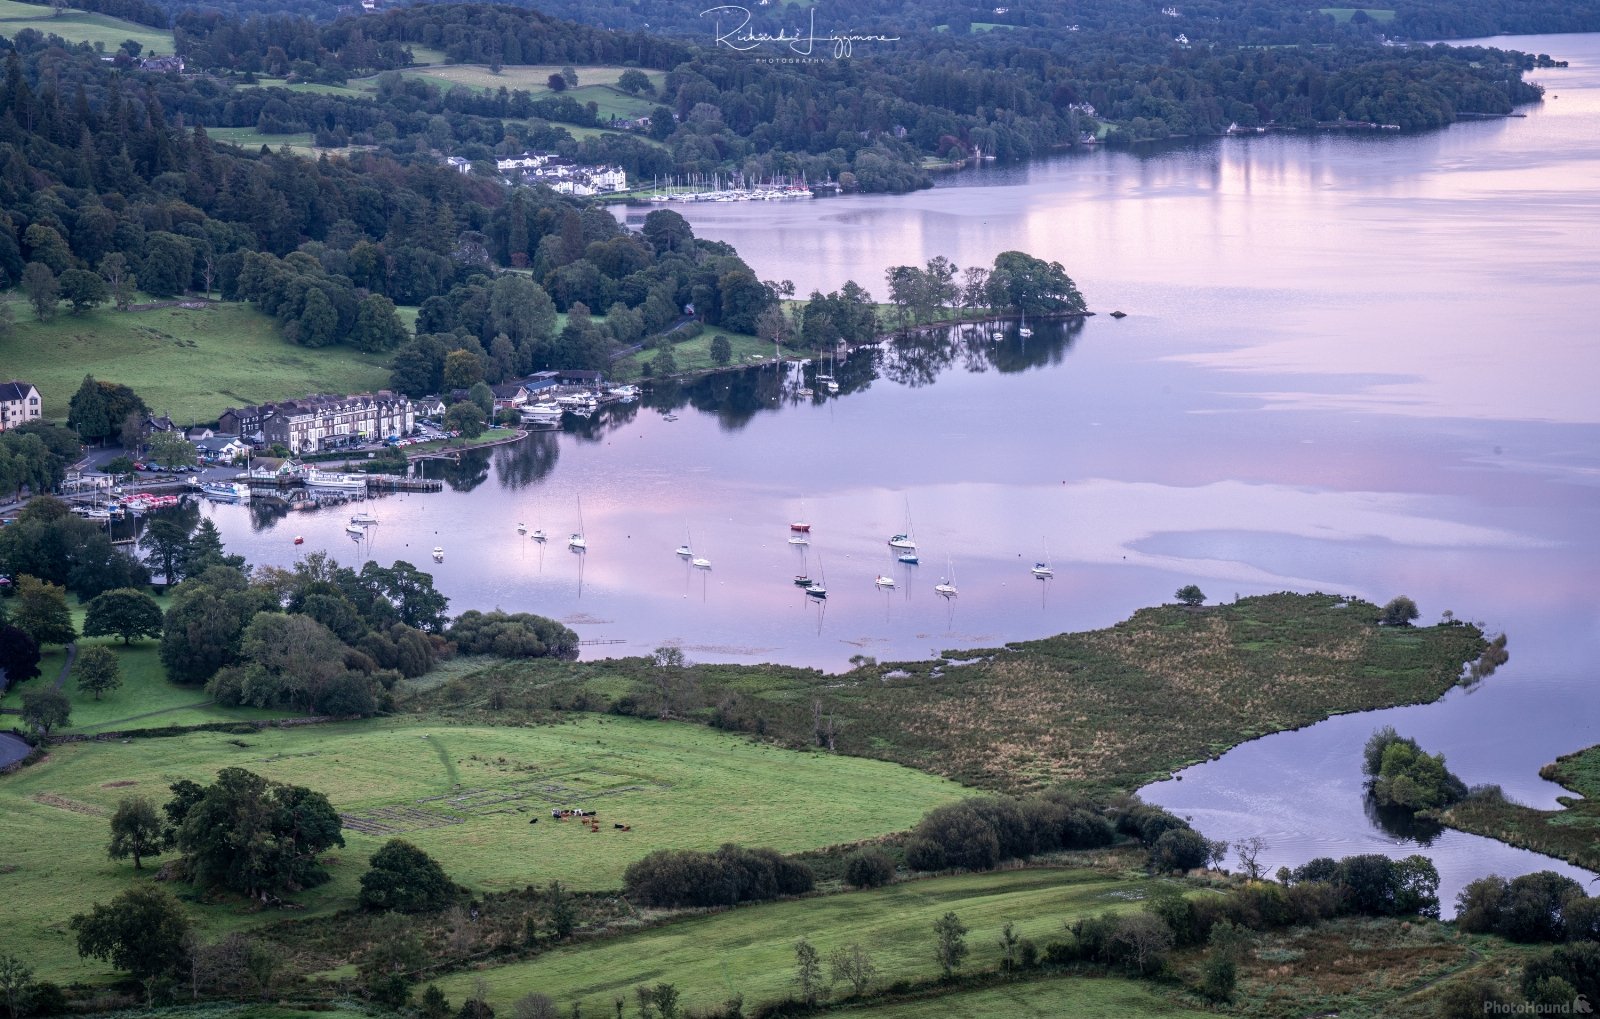 Image of Loughrigg Fell by Richard Lizzimore